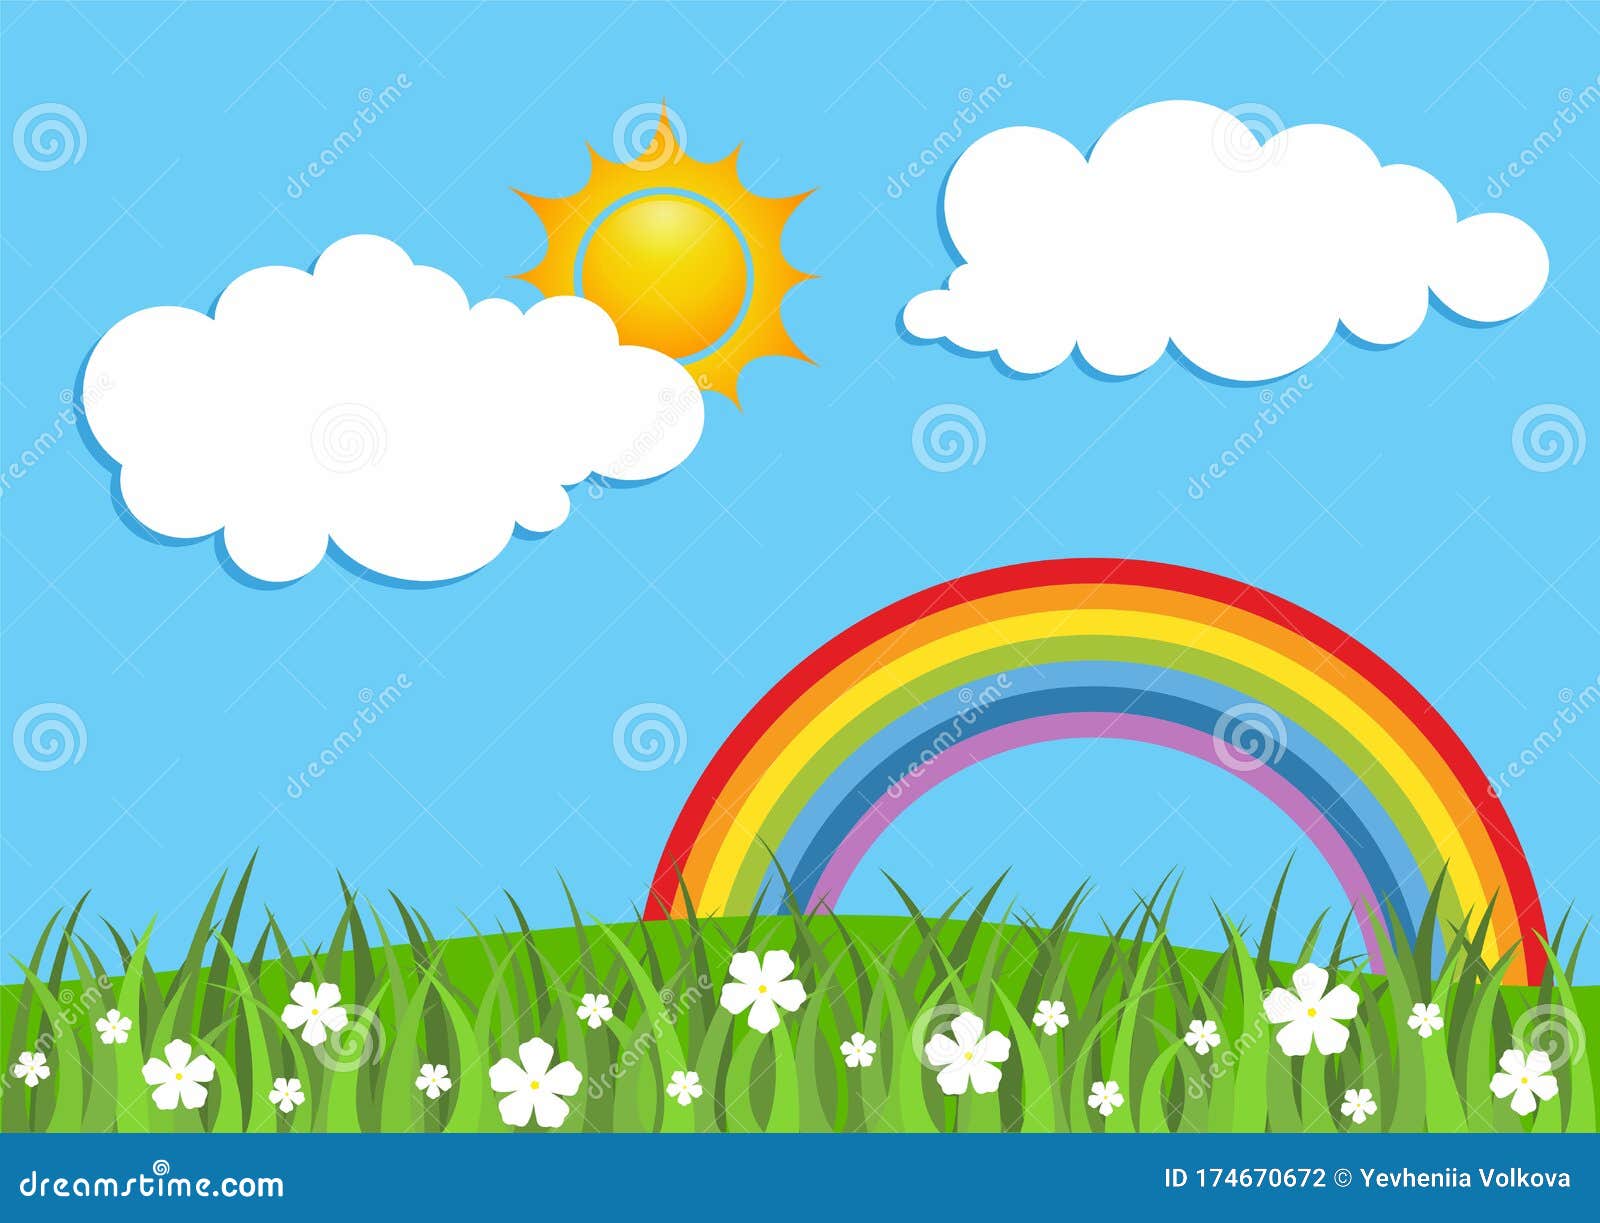 Spring Background with Rainbow. Rainbow with Clouds, Sun, Grass and Flowers  with Blue Sky Stock Vector - Illustration of cartoon, drawing: 174670672